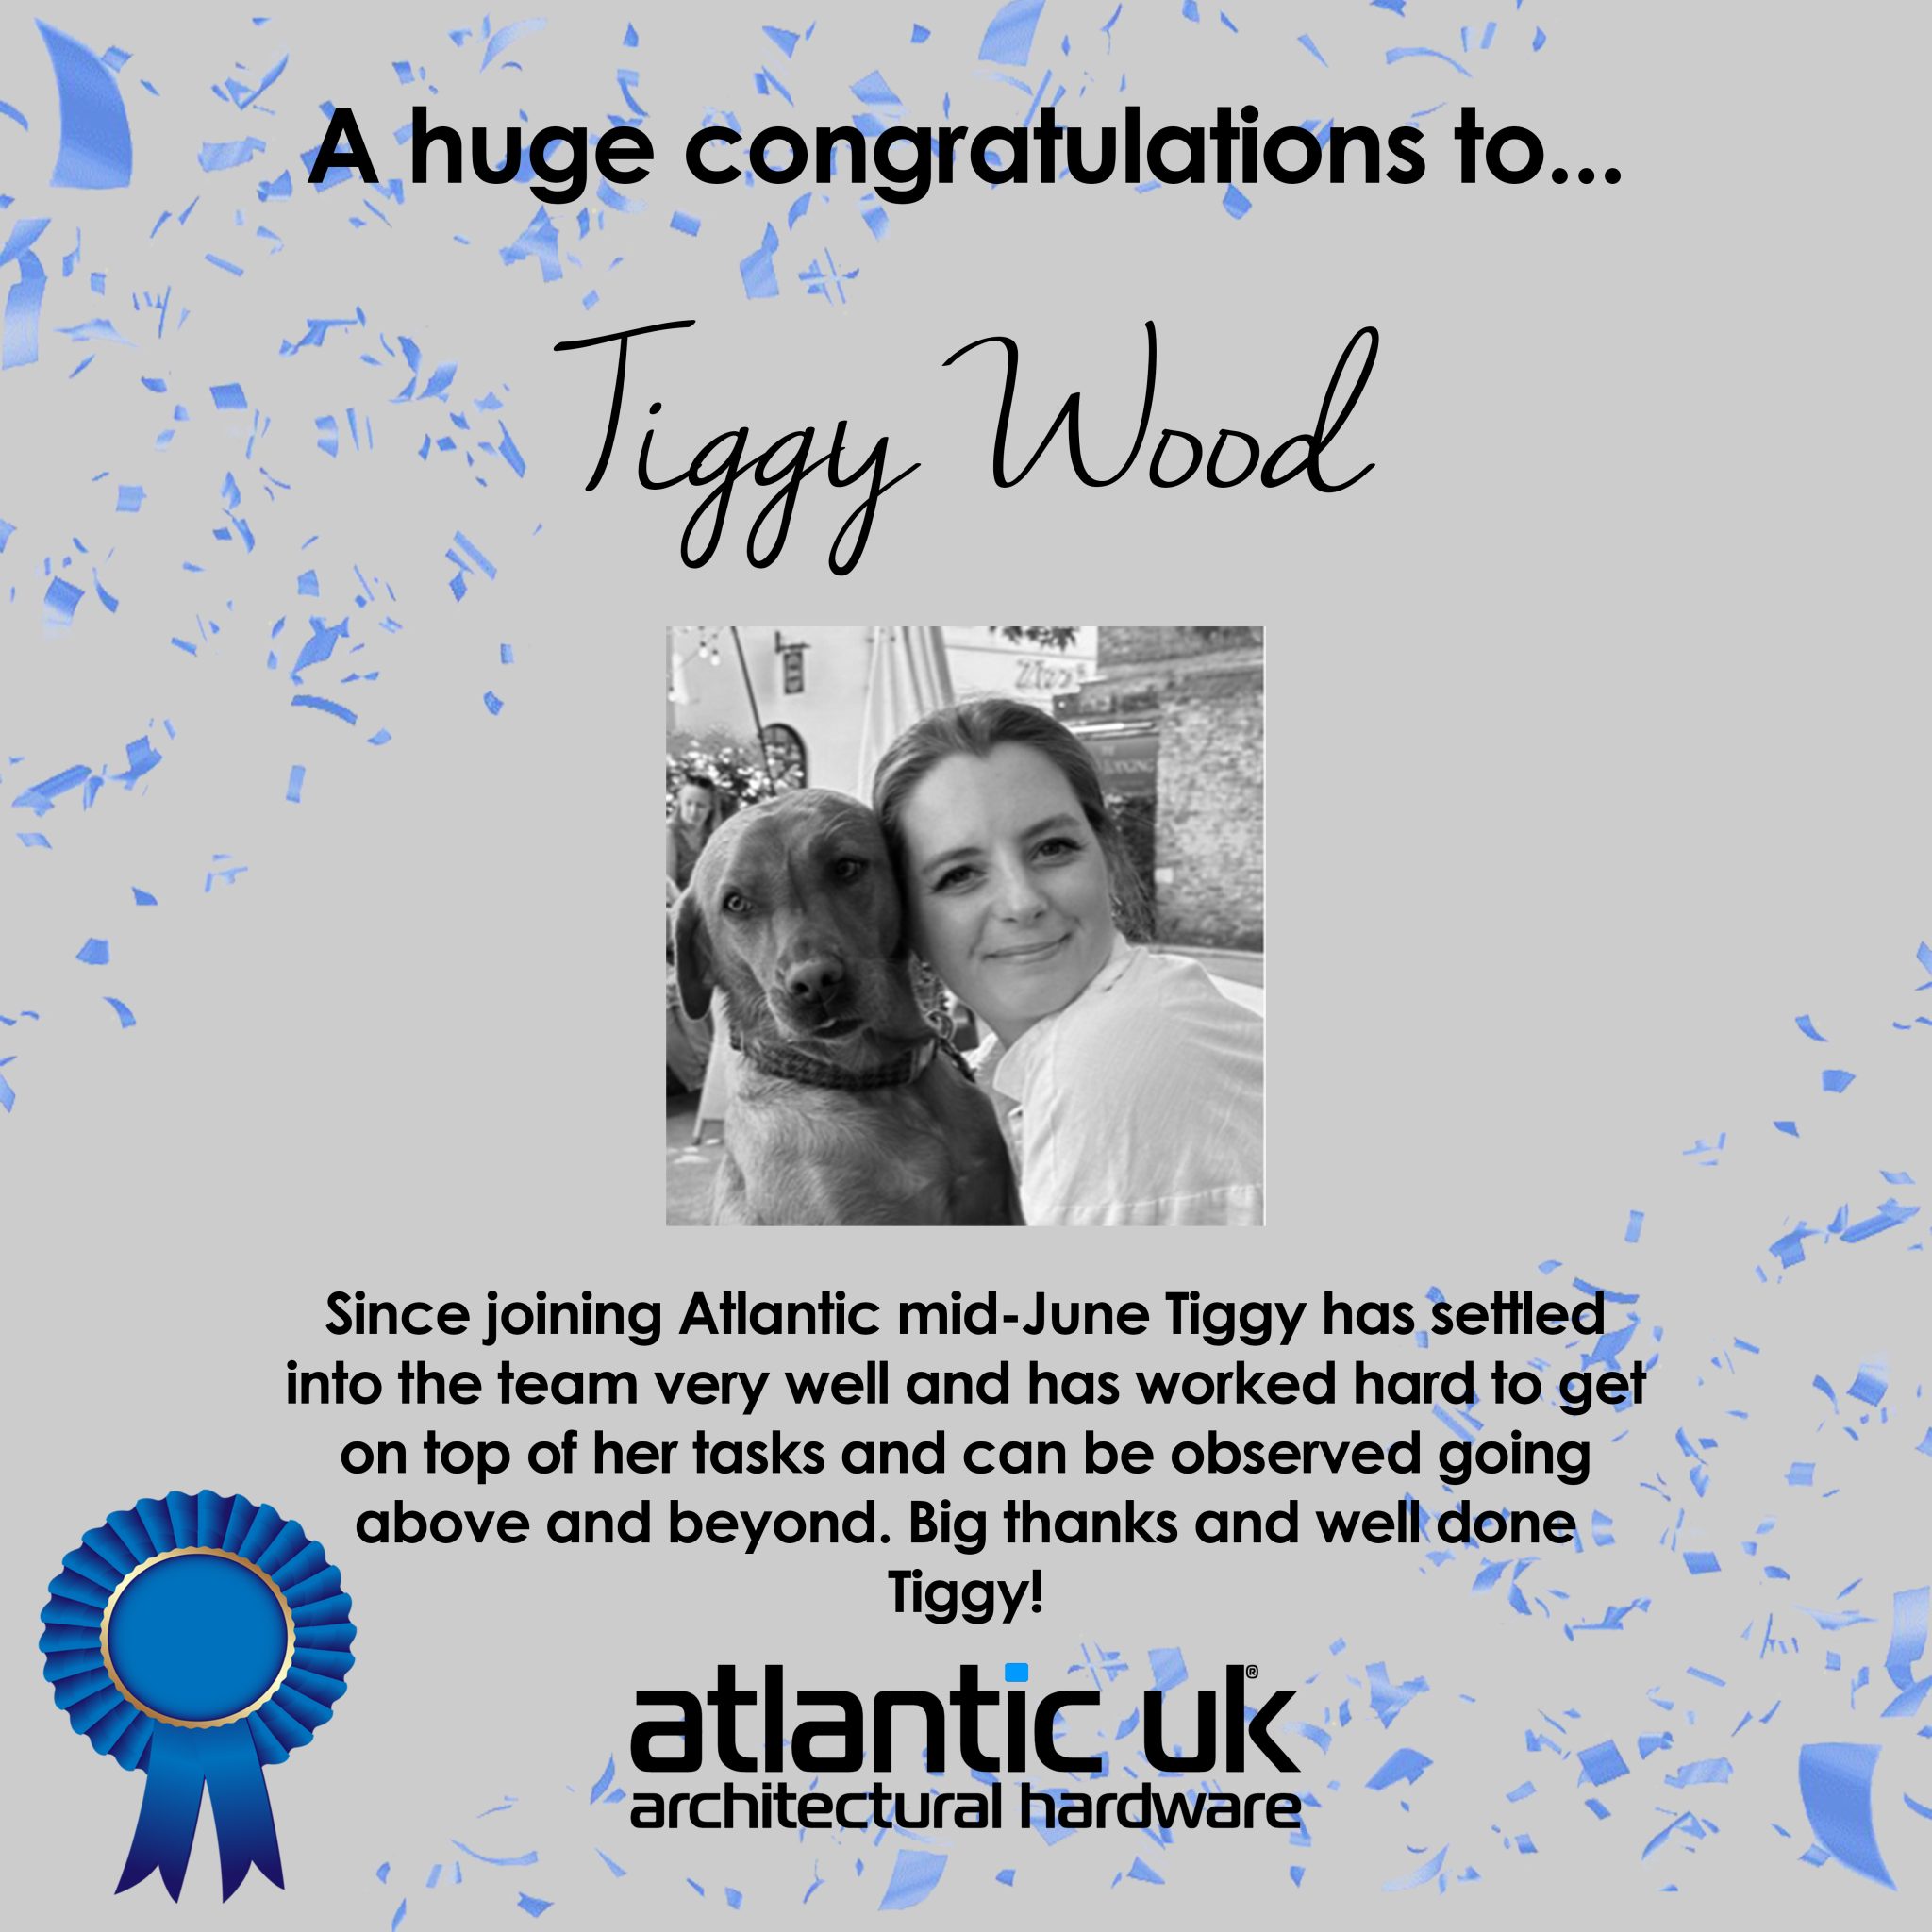 Congratulations Tiggy! Employee of the month for July!